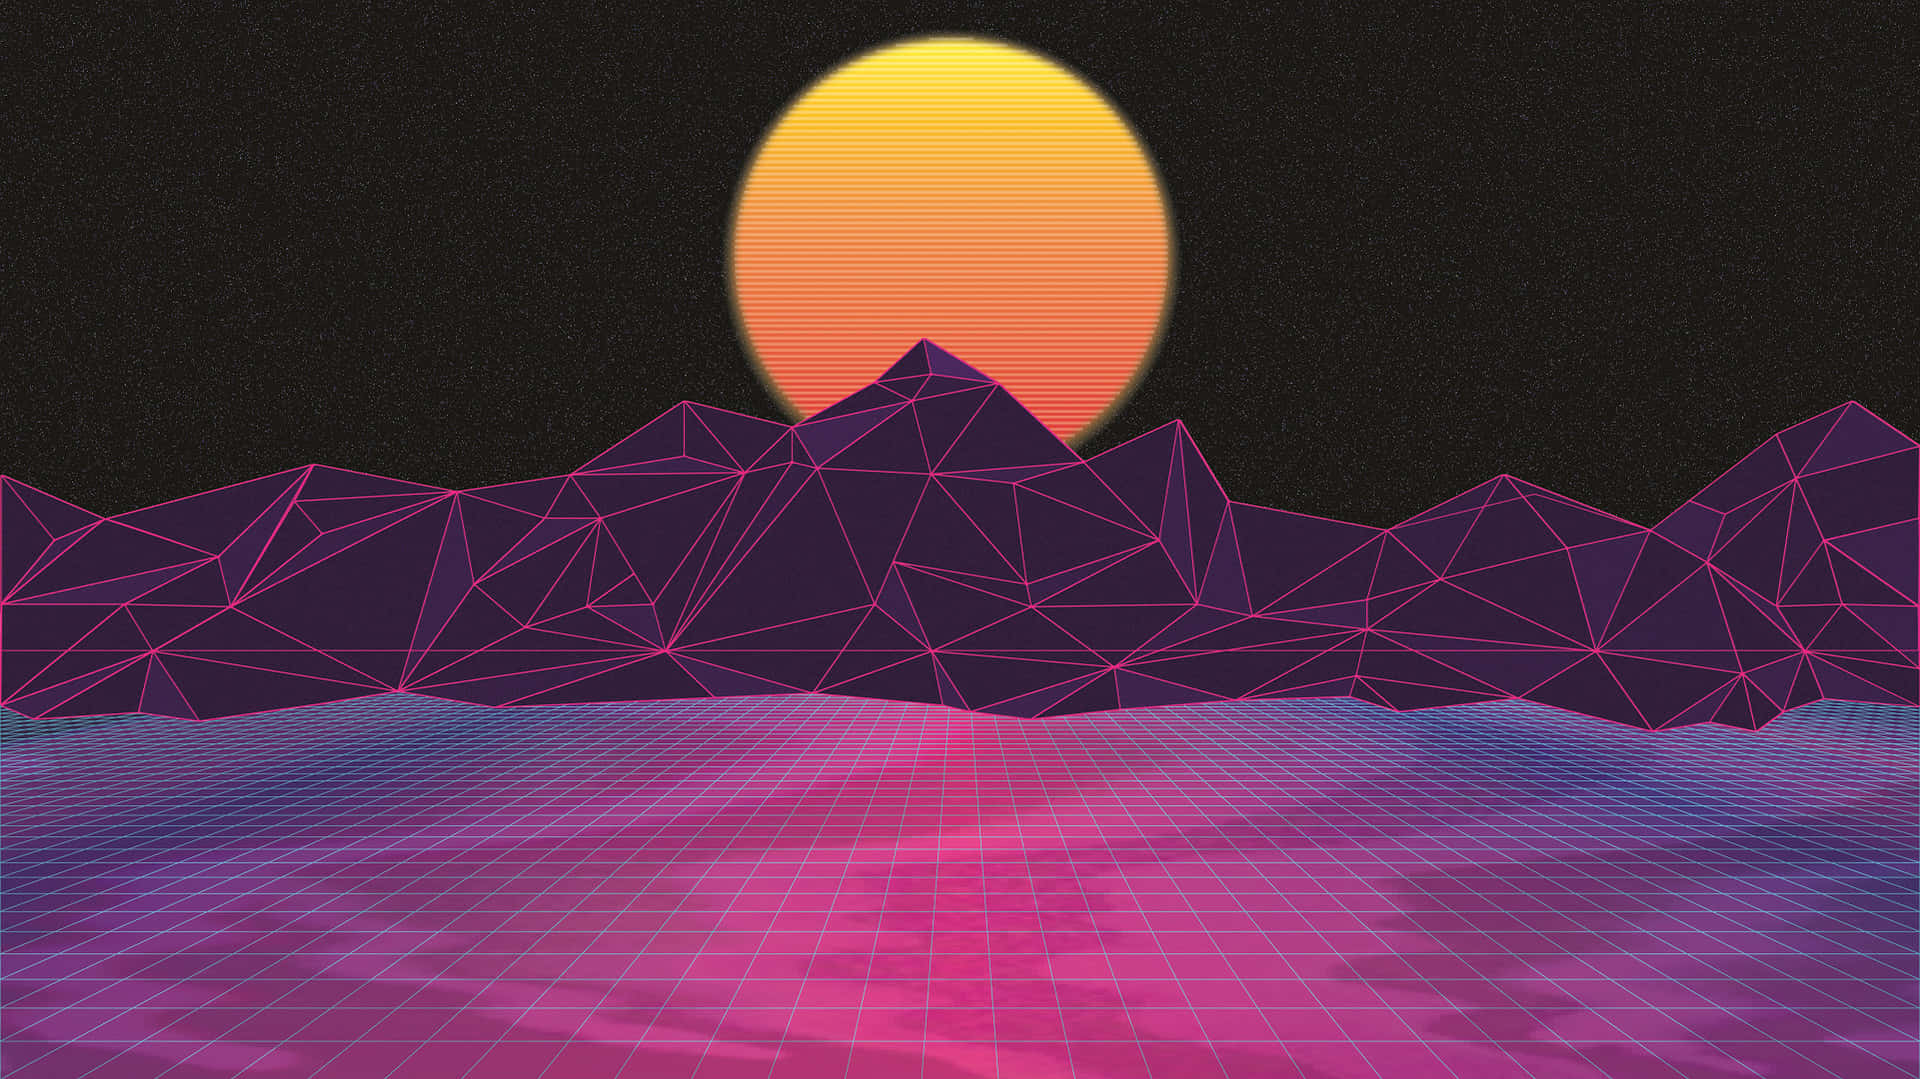 "Lose Yourself in the Aesthetic Vibes" Wallpaper